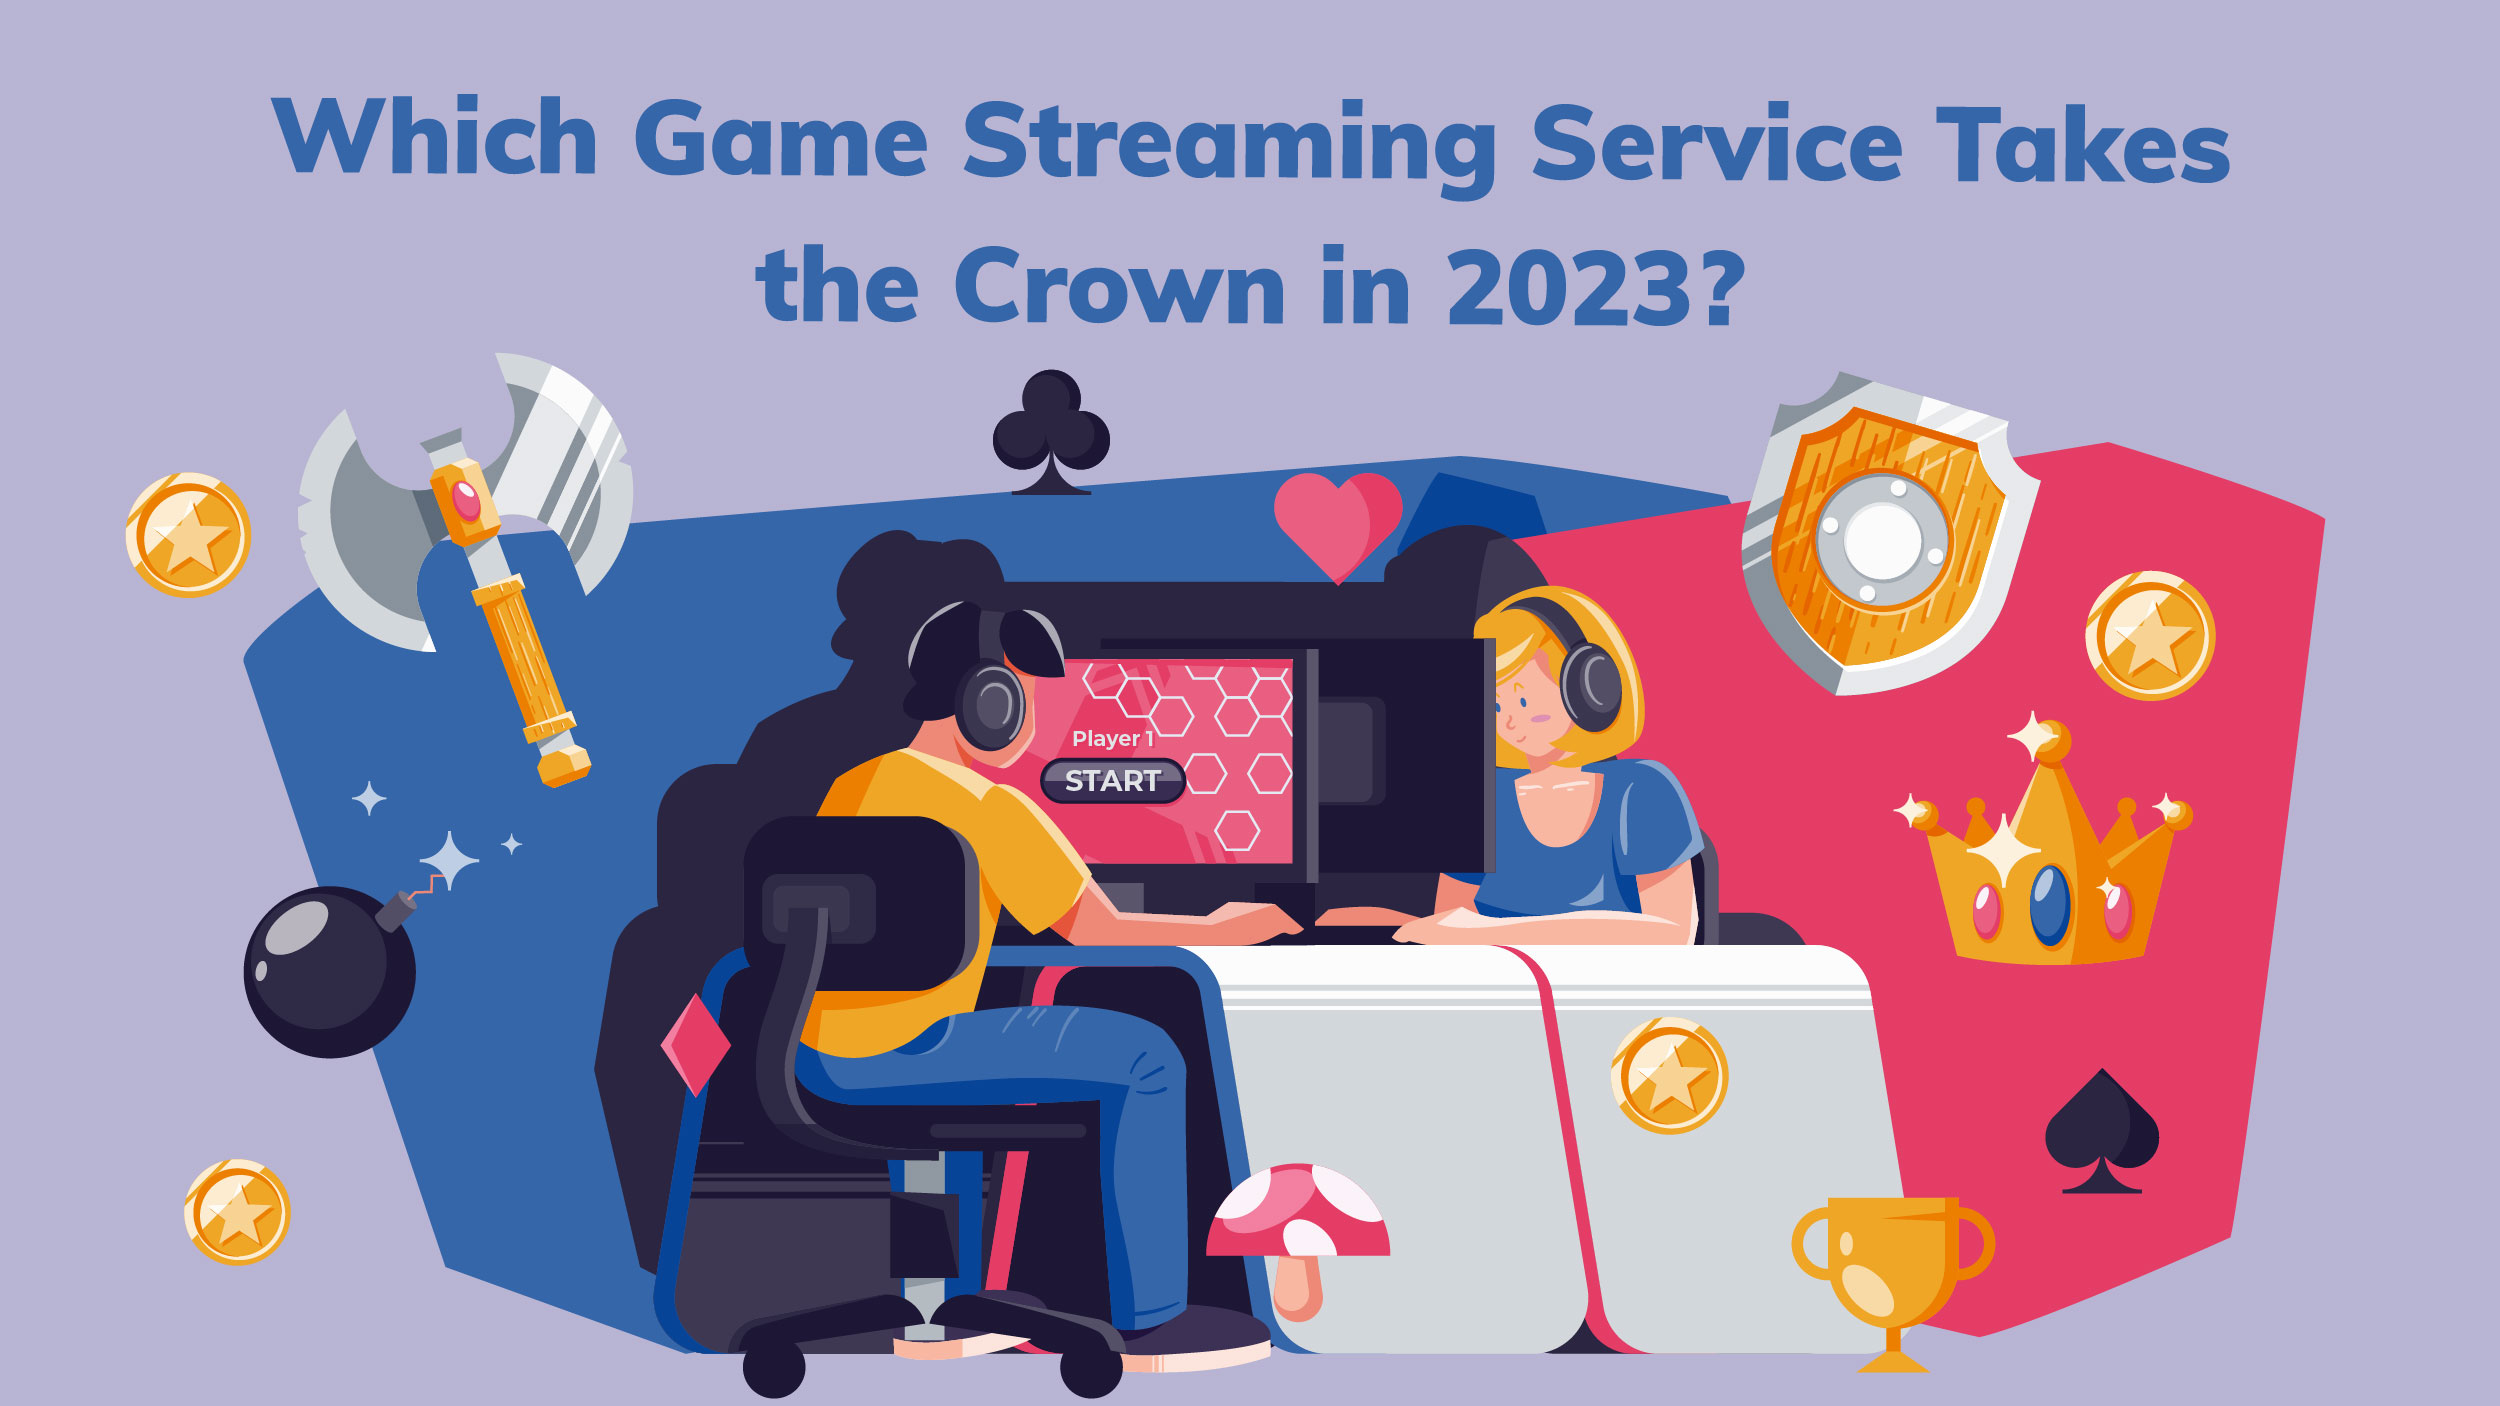 Video Game Streaming Services